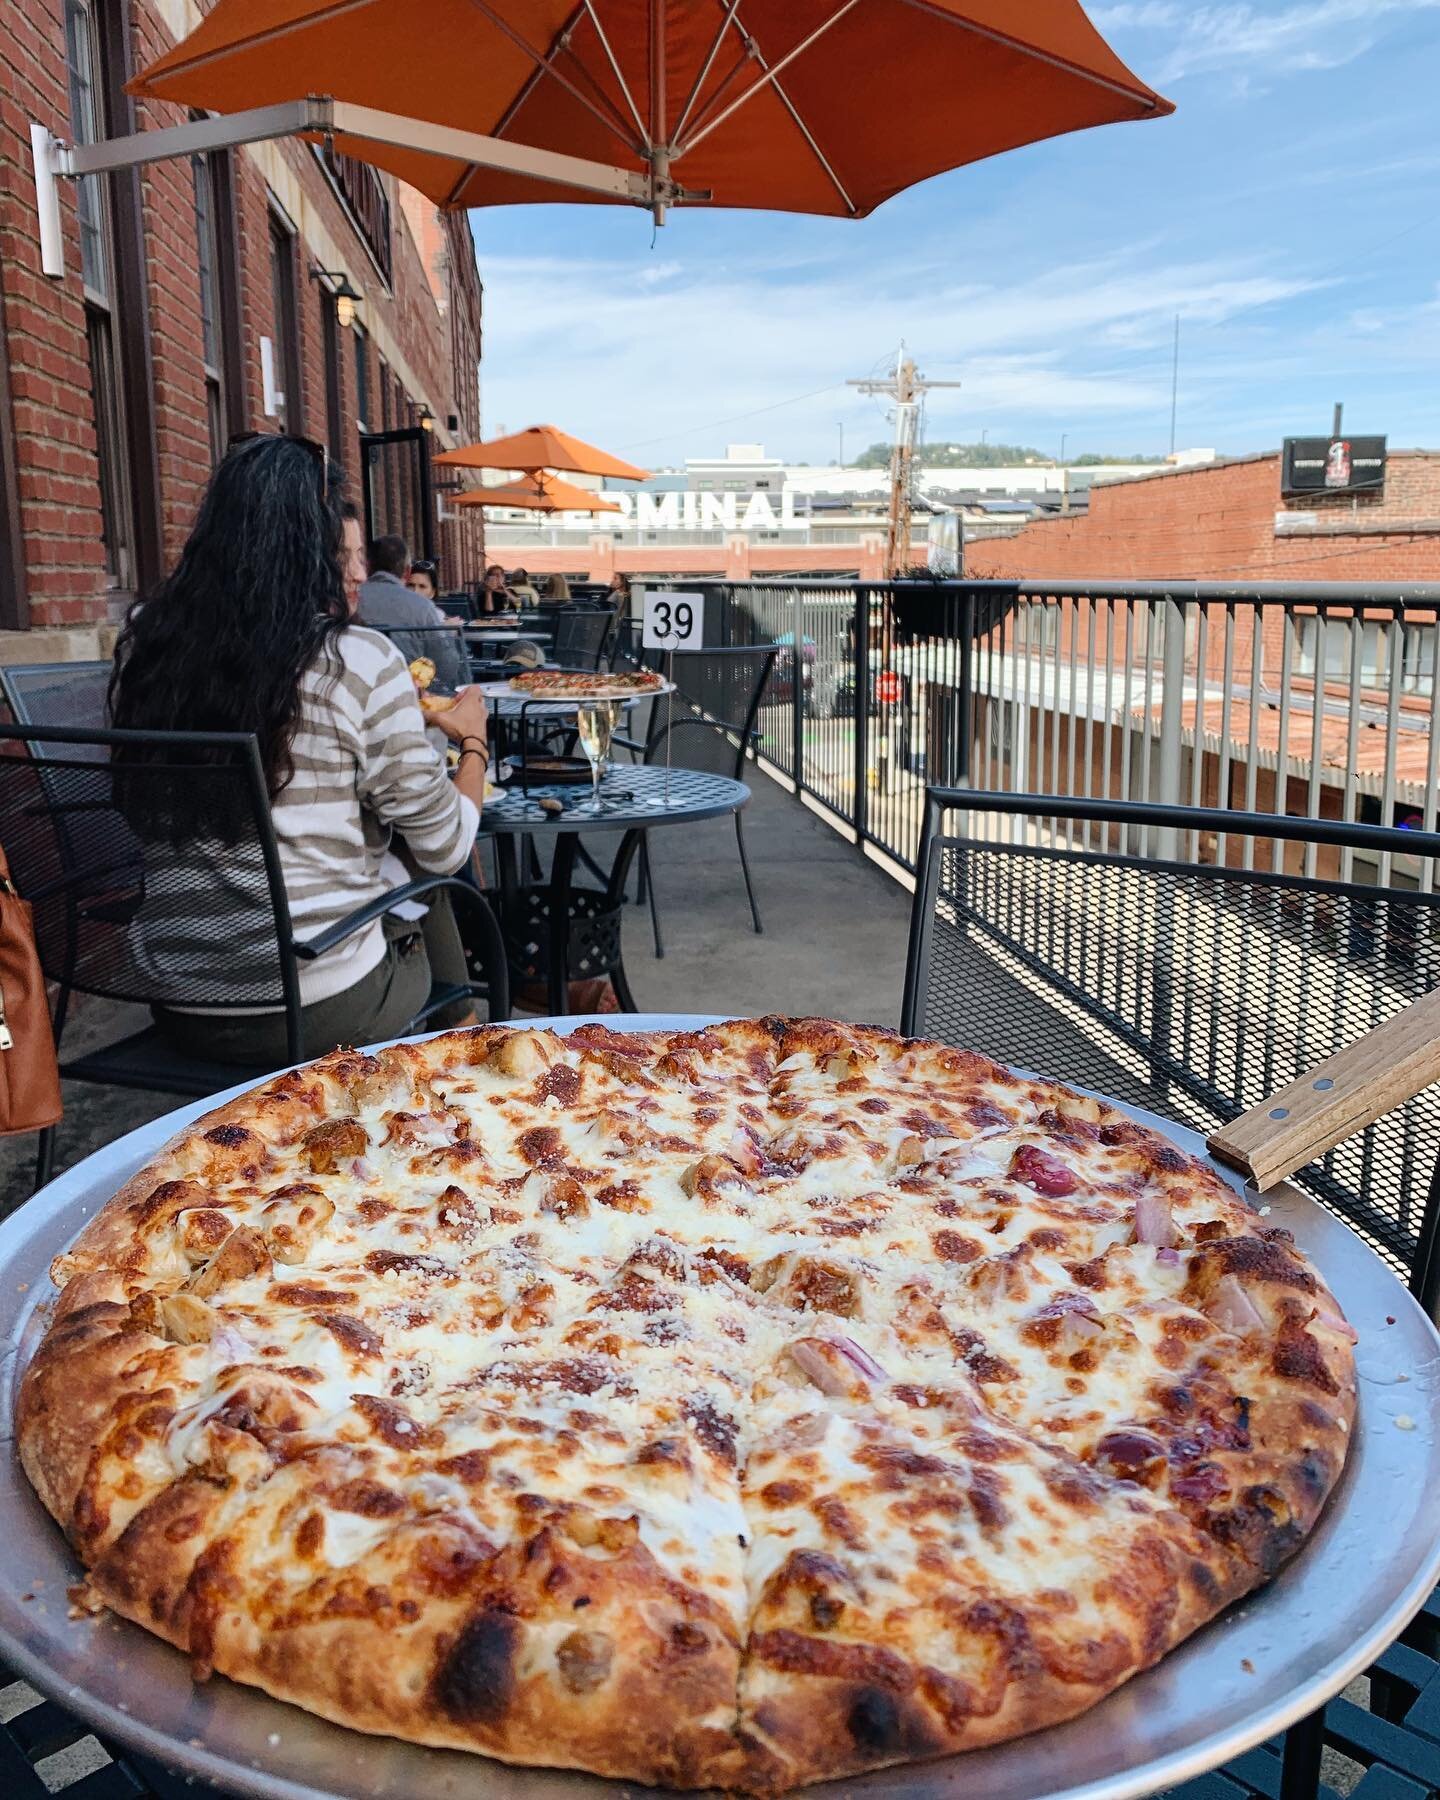 Whose ready for balcony days?!? 🍕⛱☀️ These 70&deg; days got us in the mooood for outdoor seating!! @thepamarket is opening their Courtyard Bar today for St. Patty&rsquo;s celebrations! So stop by for drinks, a pizza, and outdoor chillin&rsquo; in bo